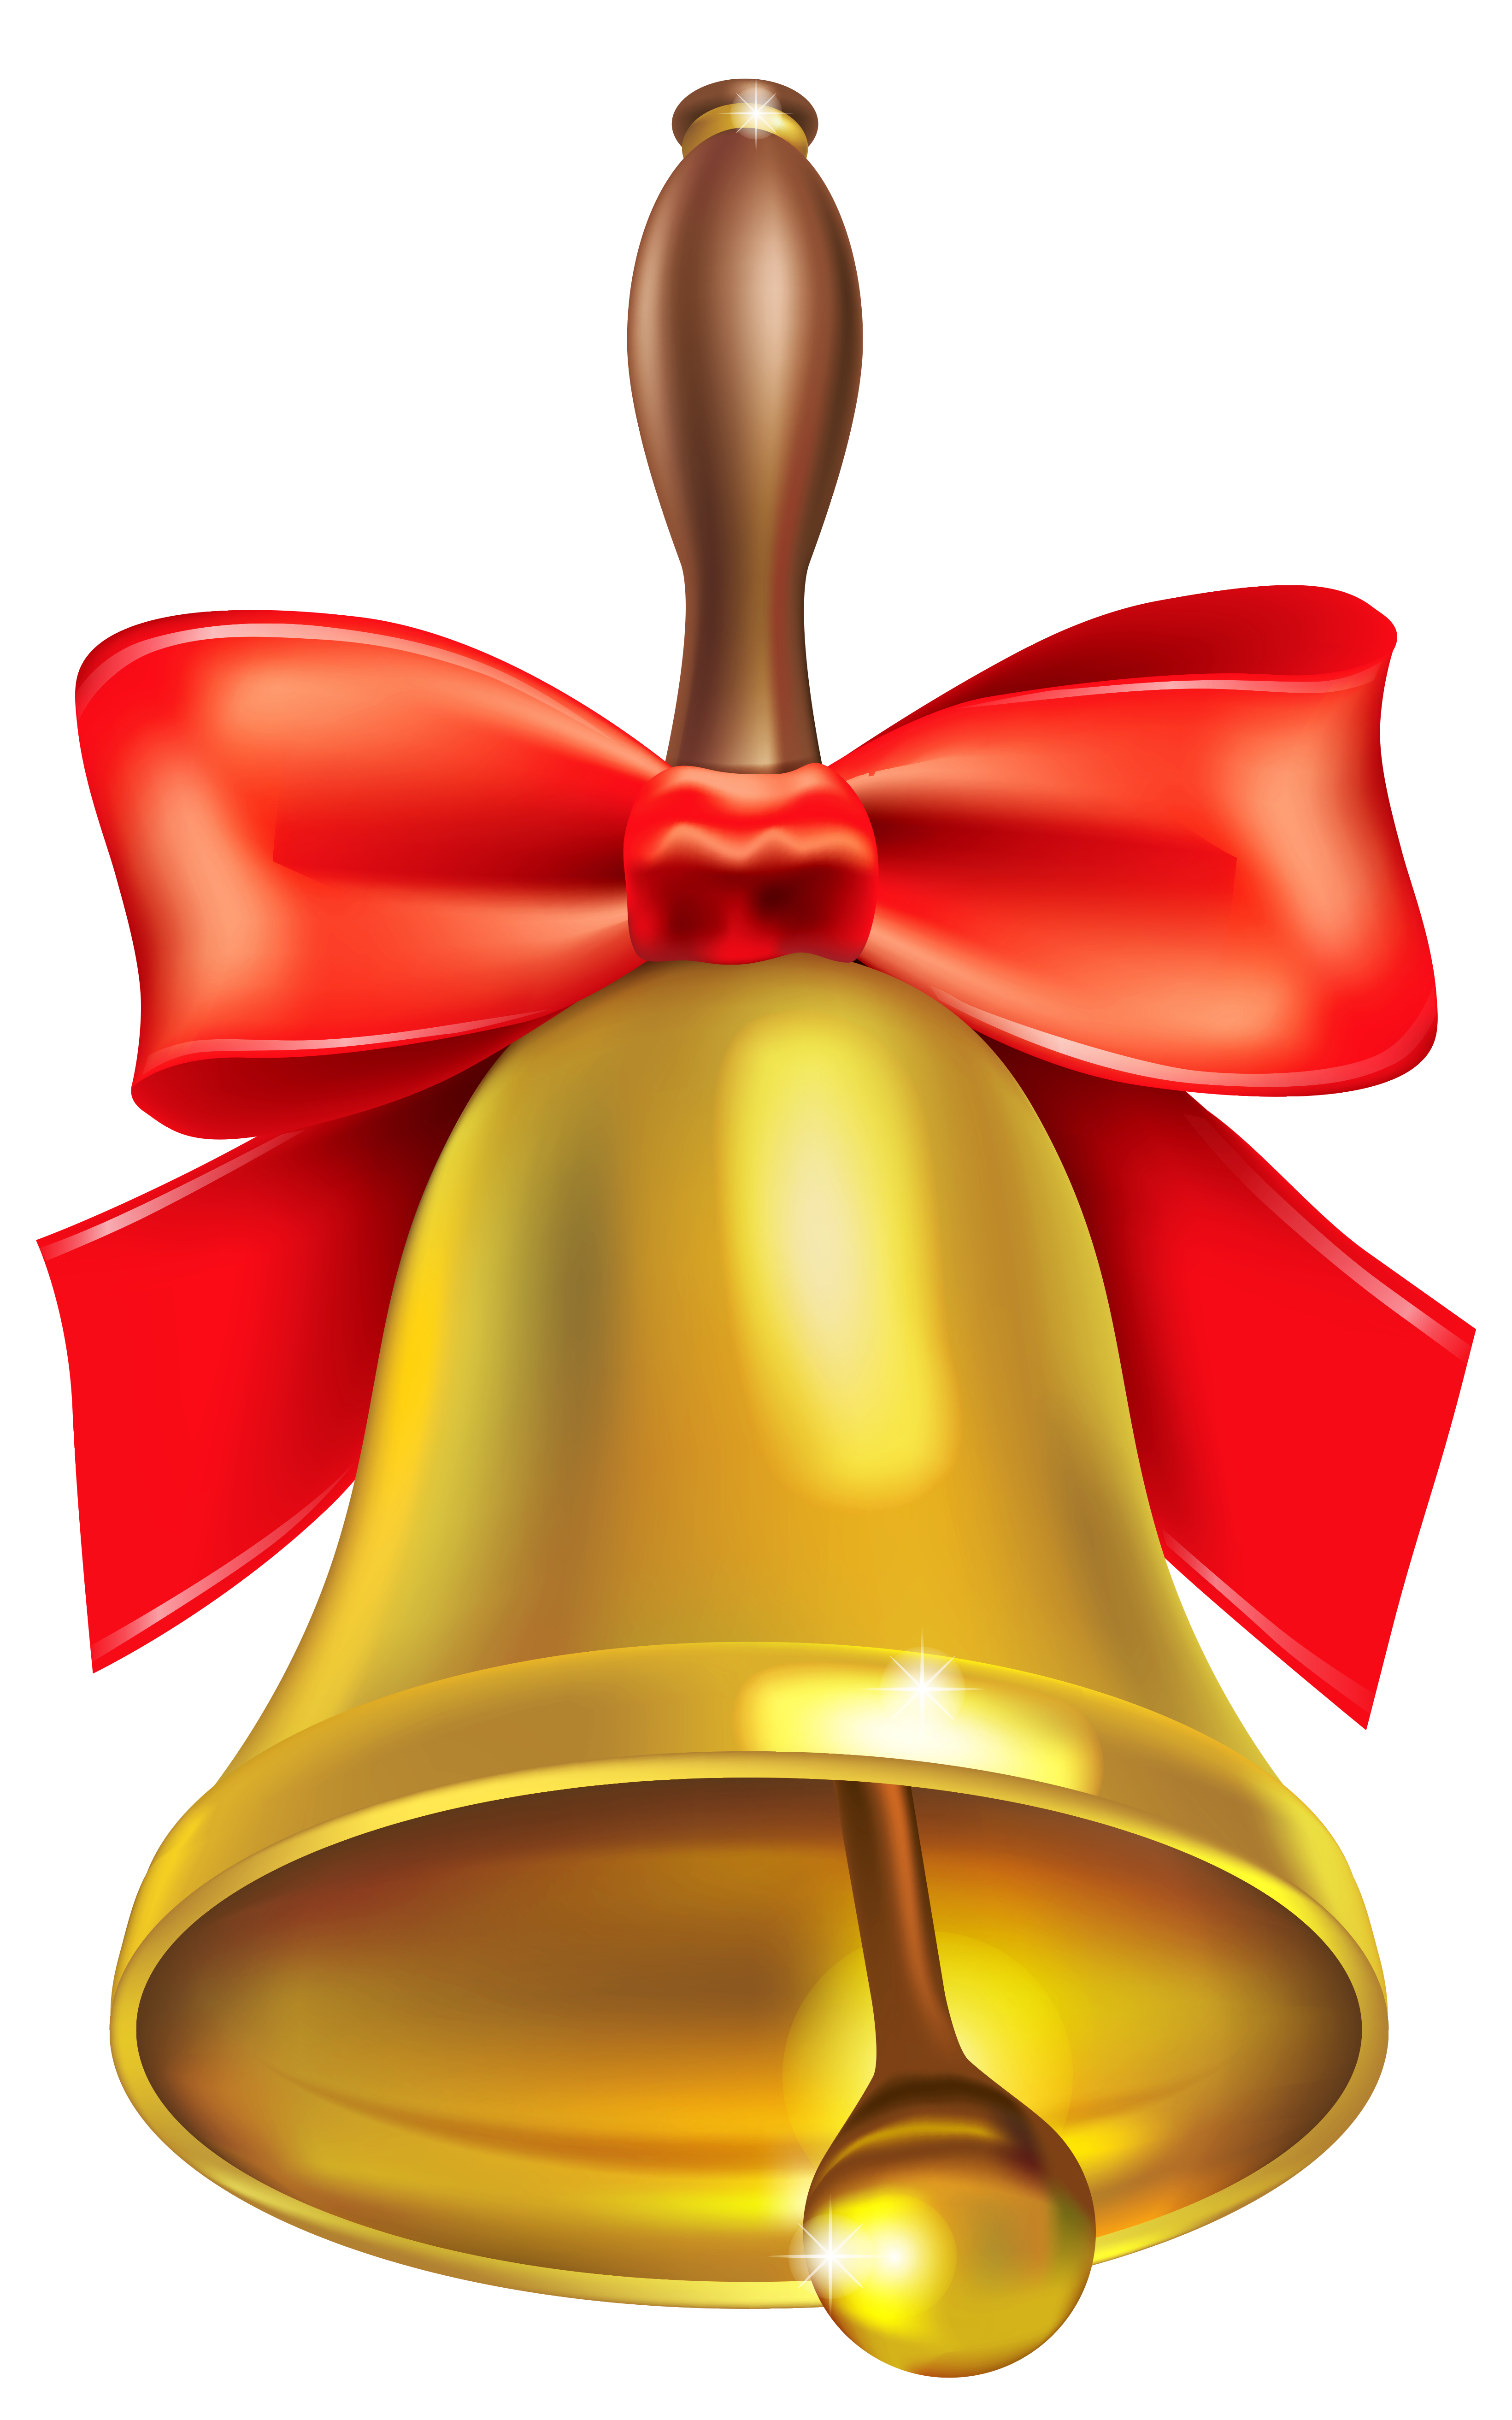 Gold School Bell PNG Clipart Picture